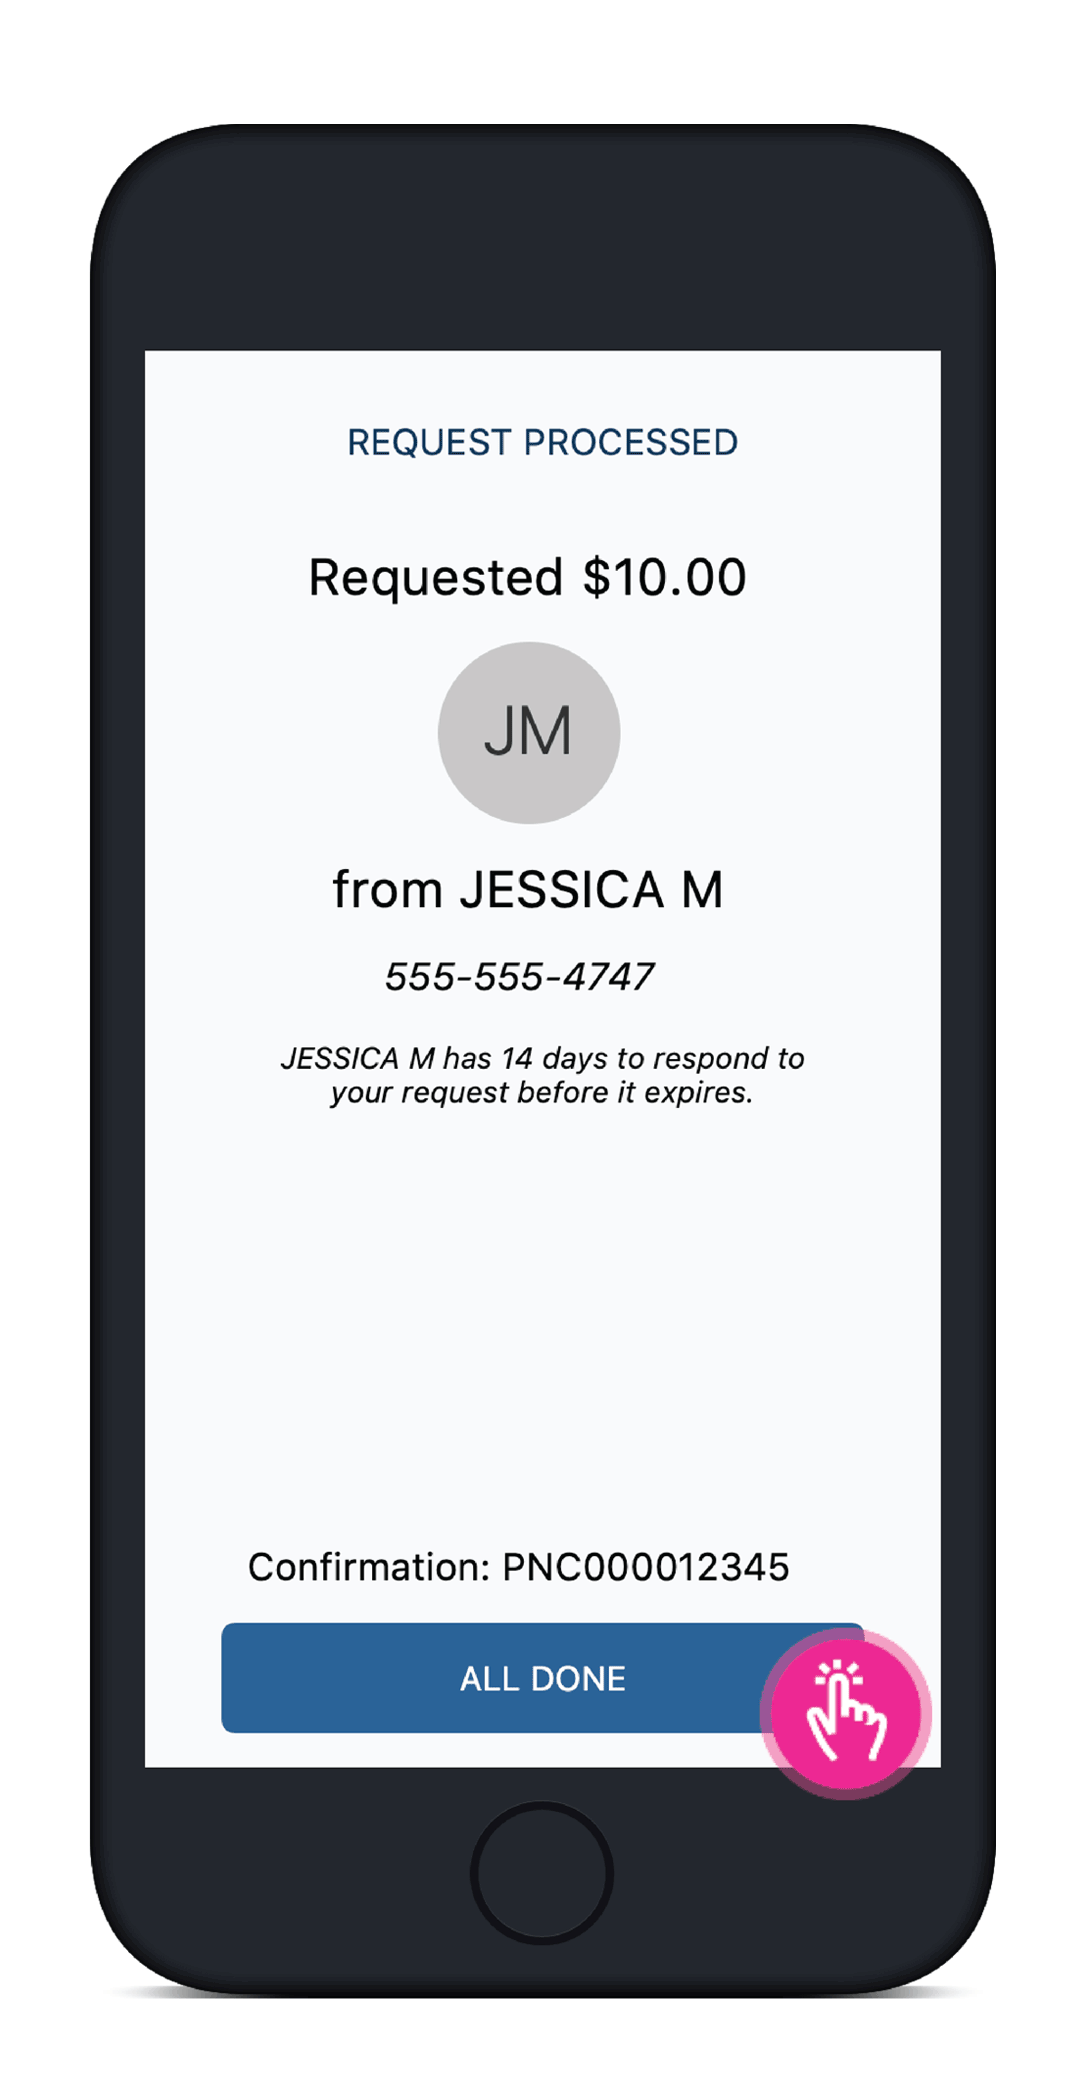 Screenshot of the Request Processed page in the PNC Mobile app with All Done button highlighted